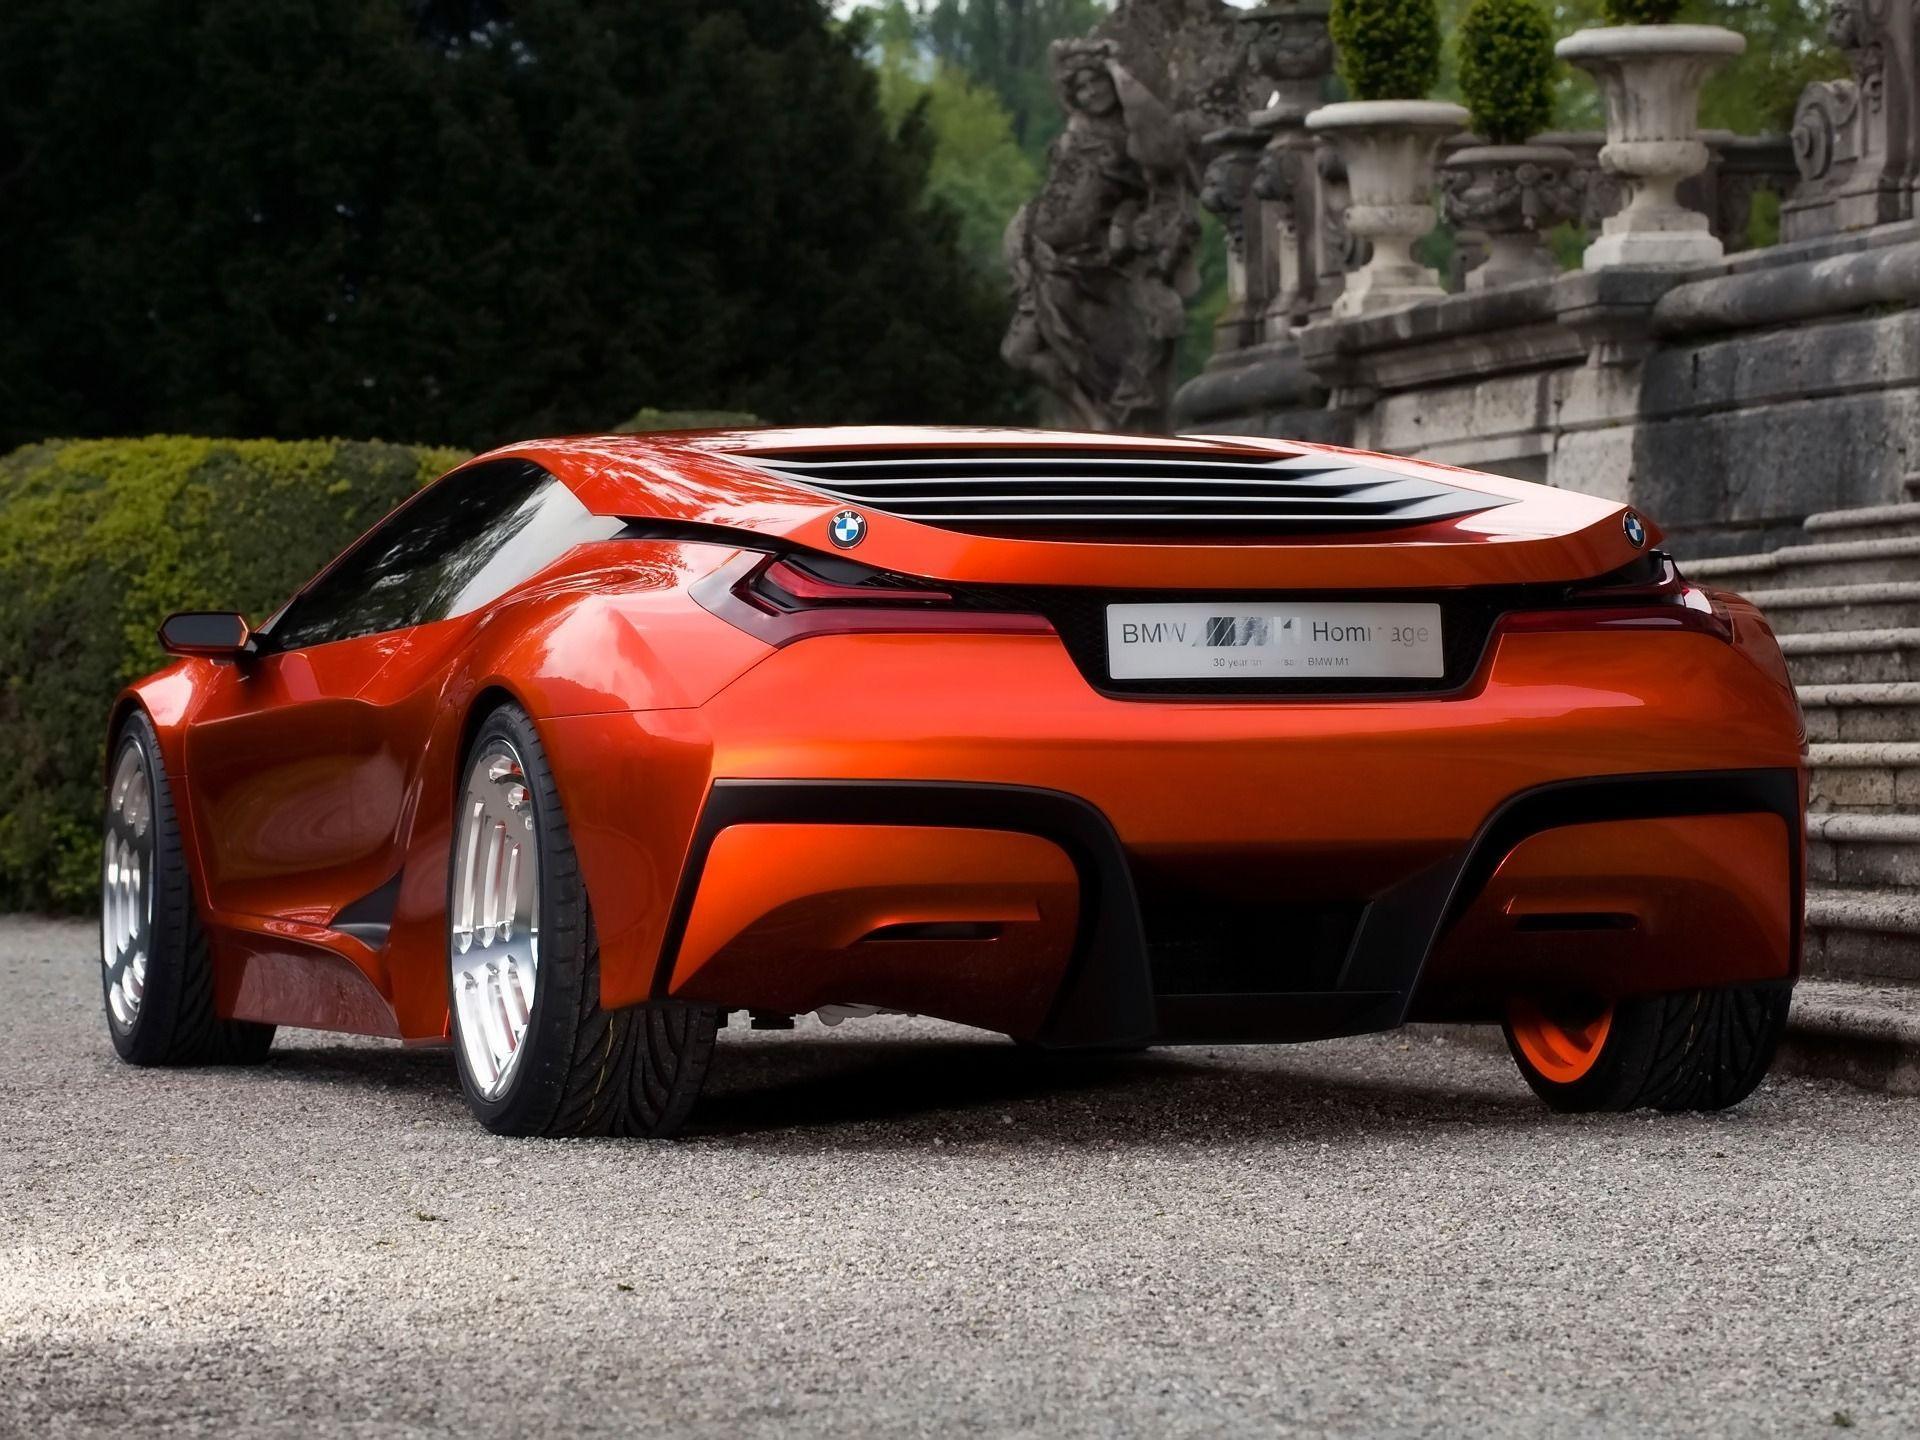 BMW M1 Concept Wallpaper BMW Cars Wallpaper in jpg format for free